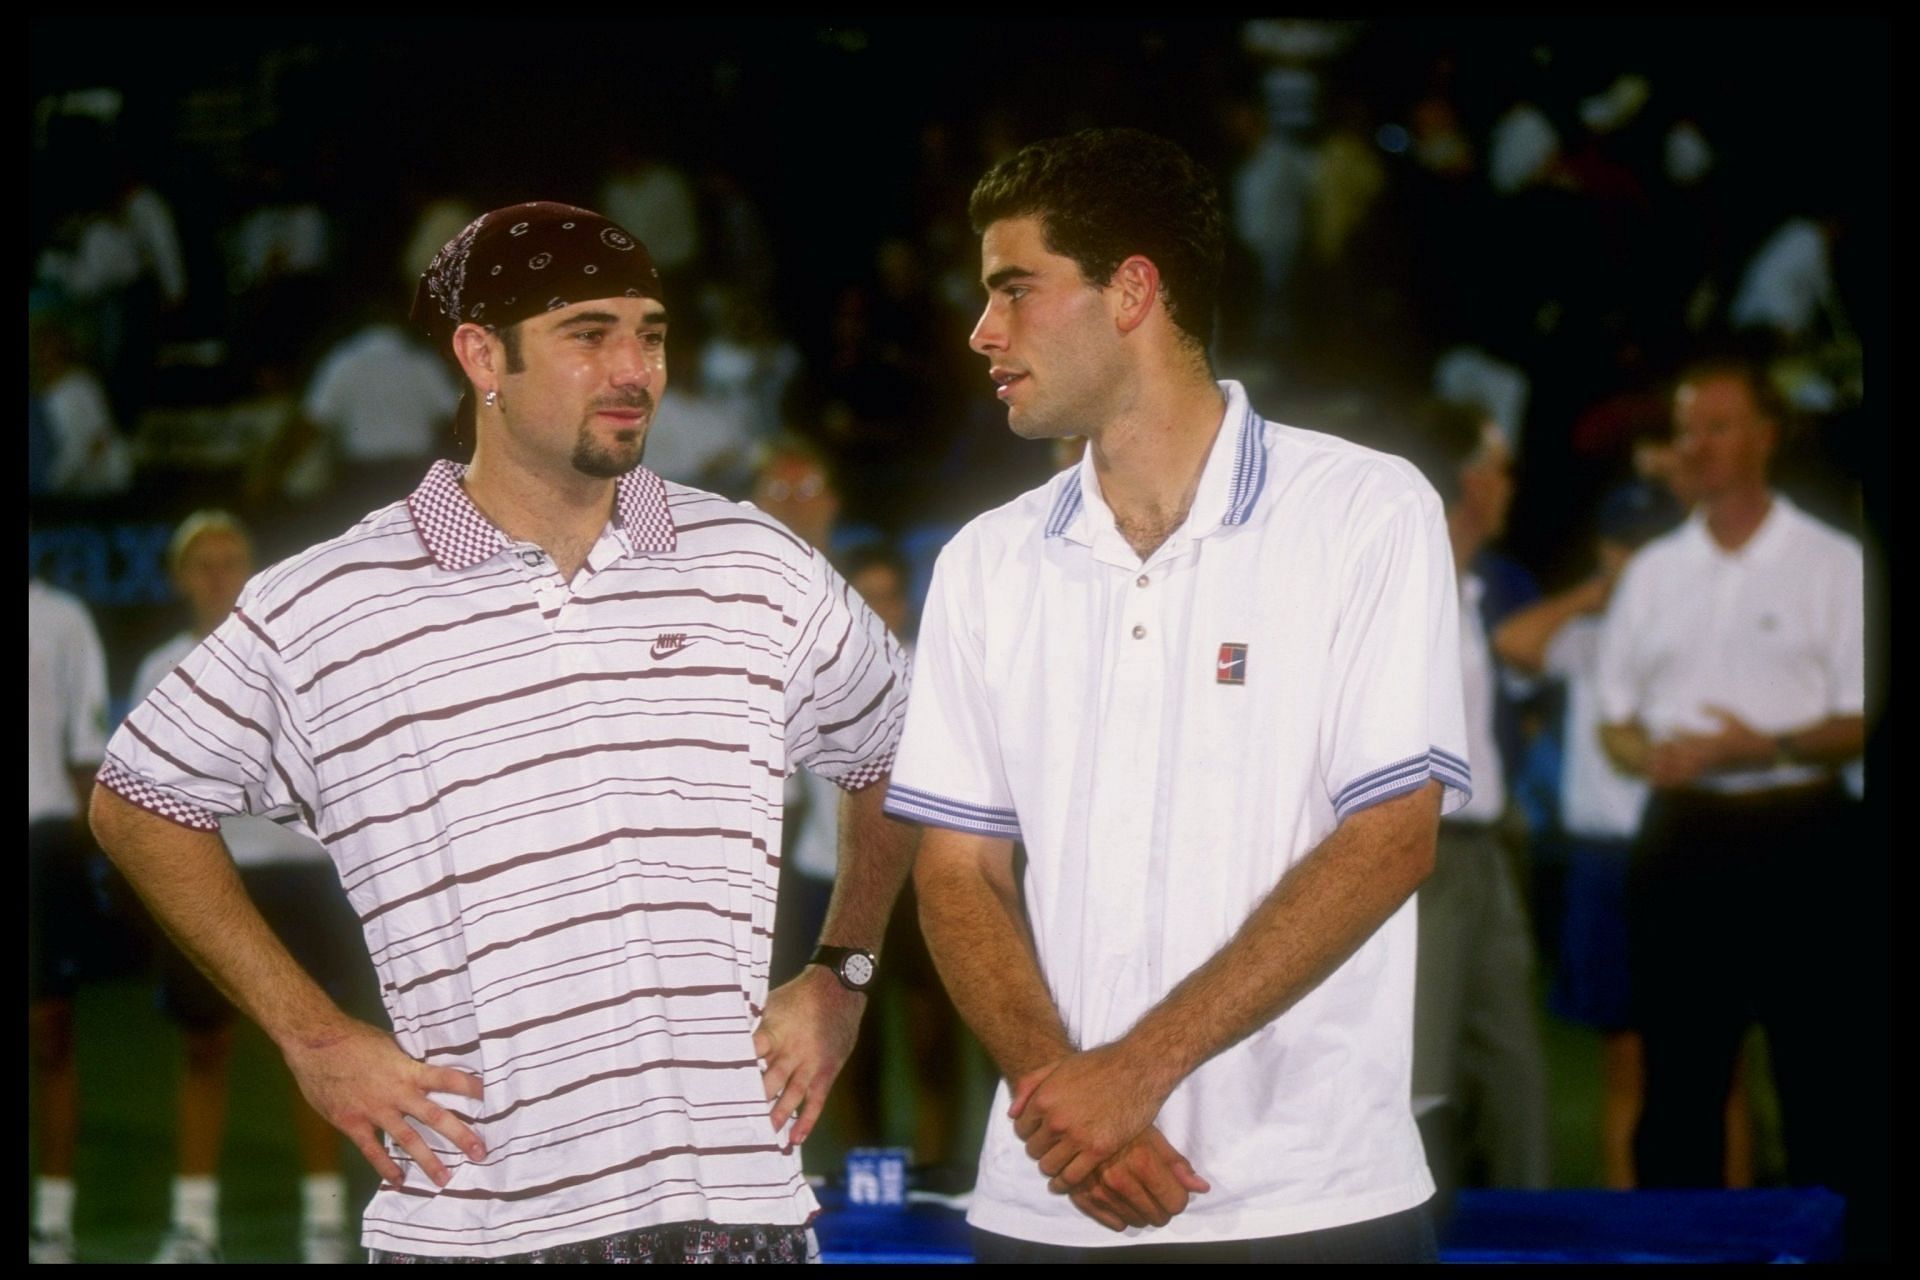 Andre Agassi (L) and Pete Sapmras